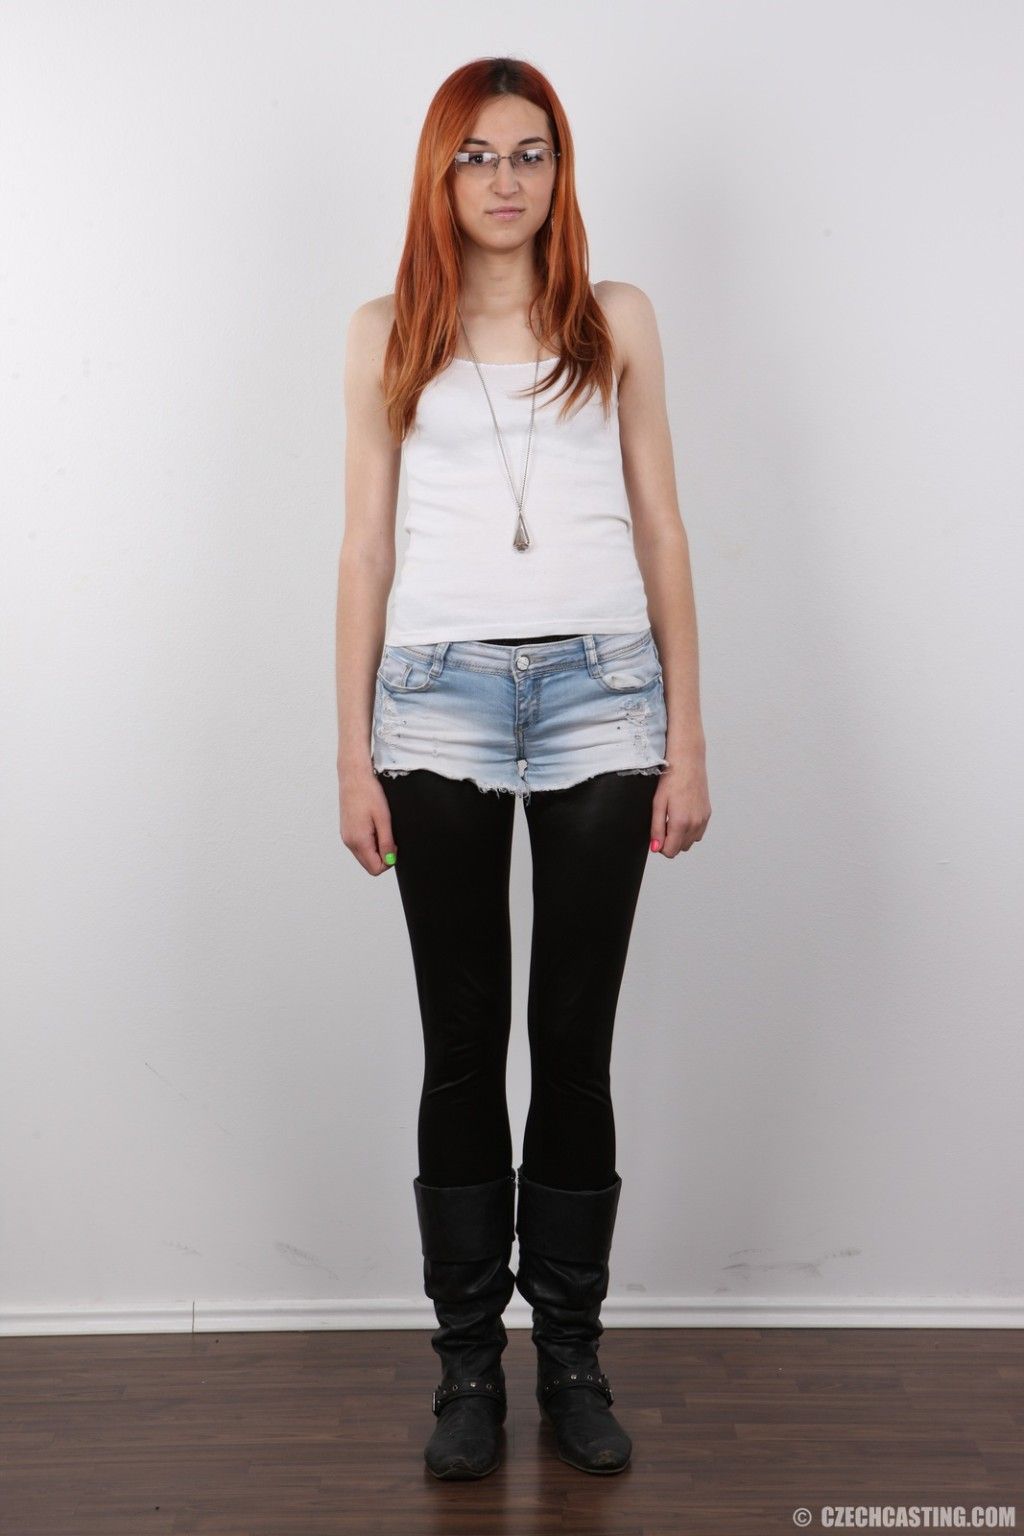 This ginger head has the longest legs you\'ve seen. her speciality is blowjobs.